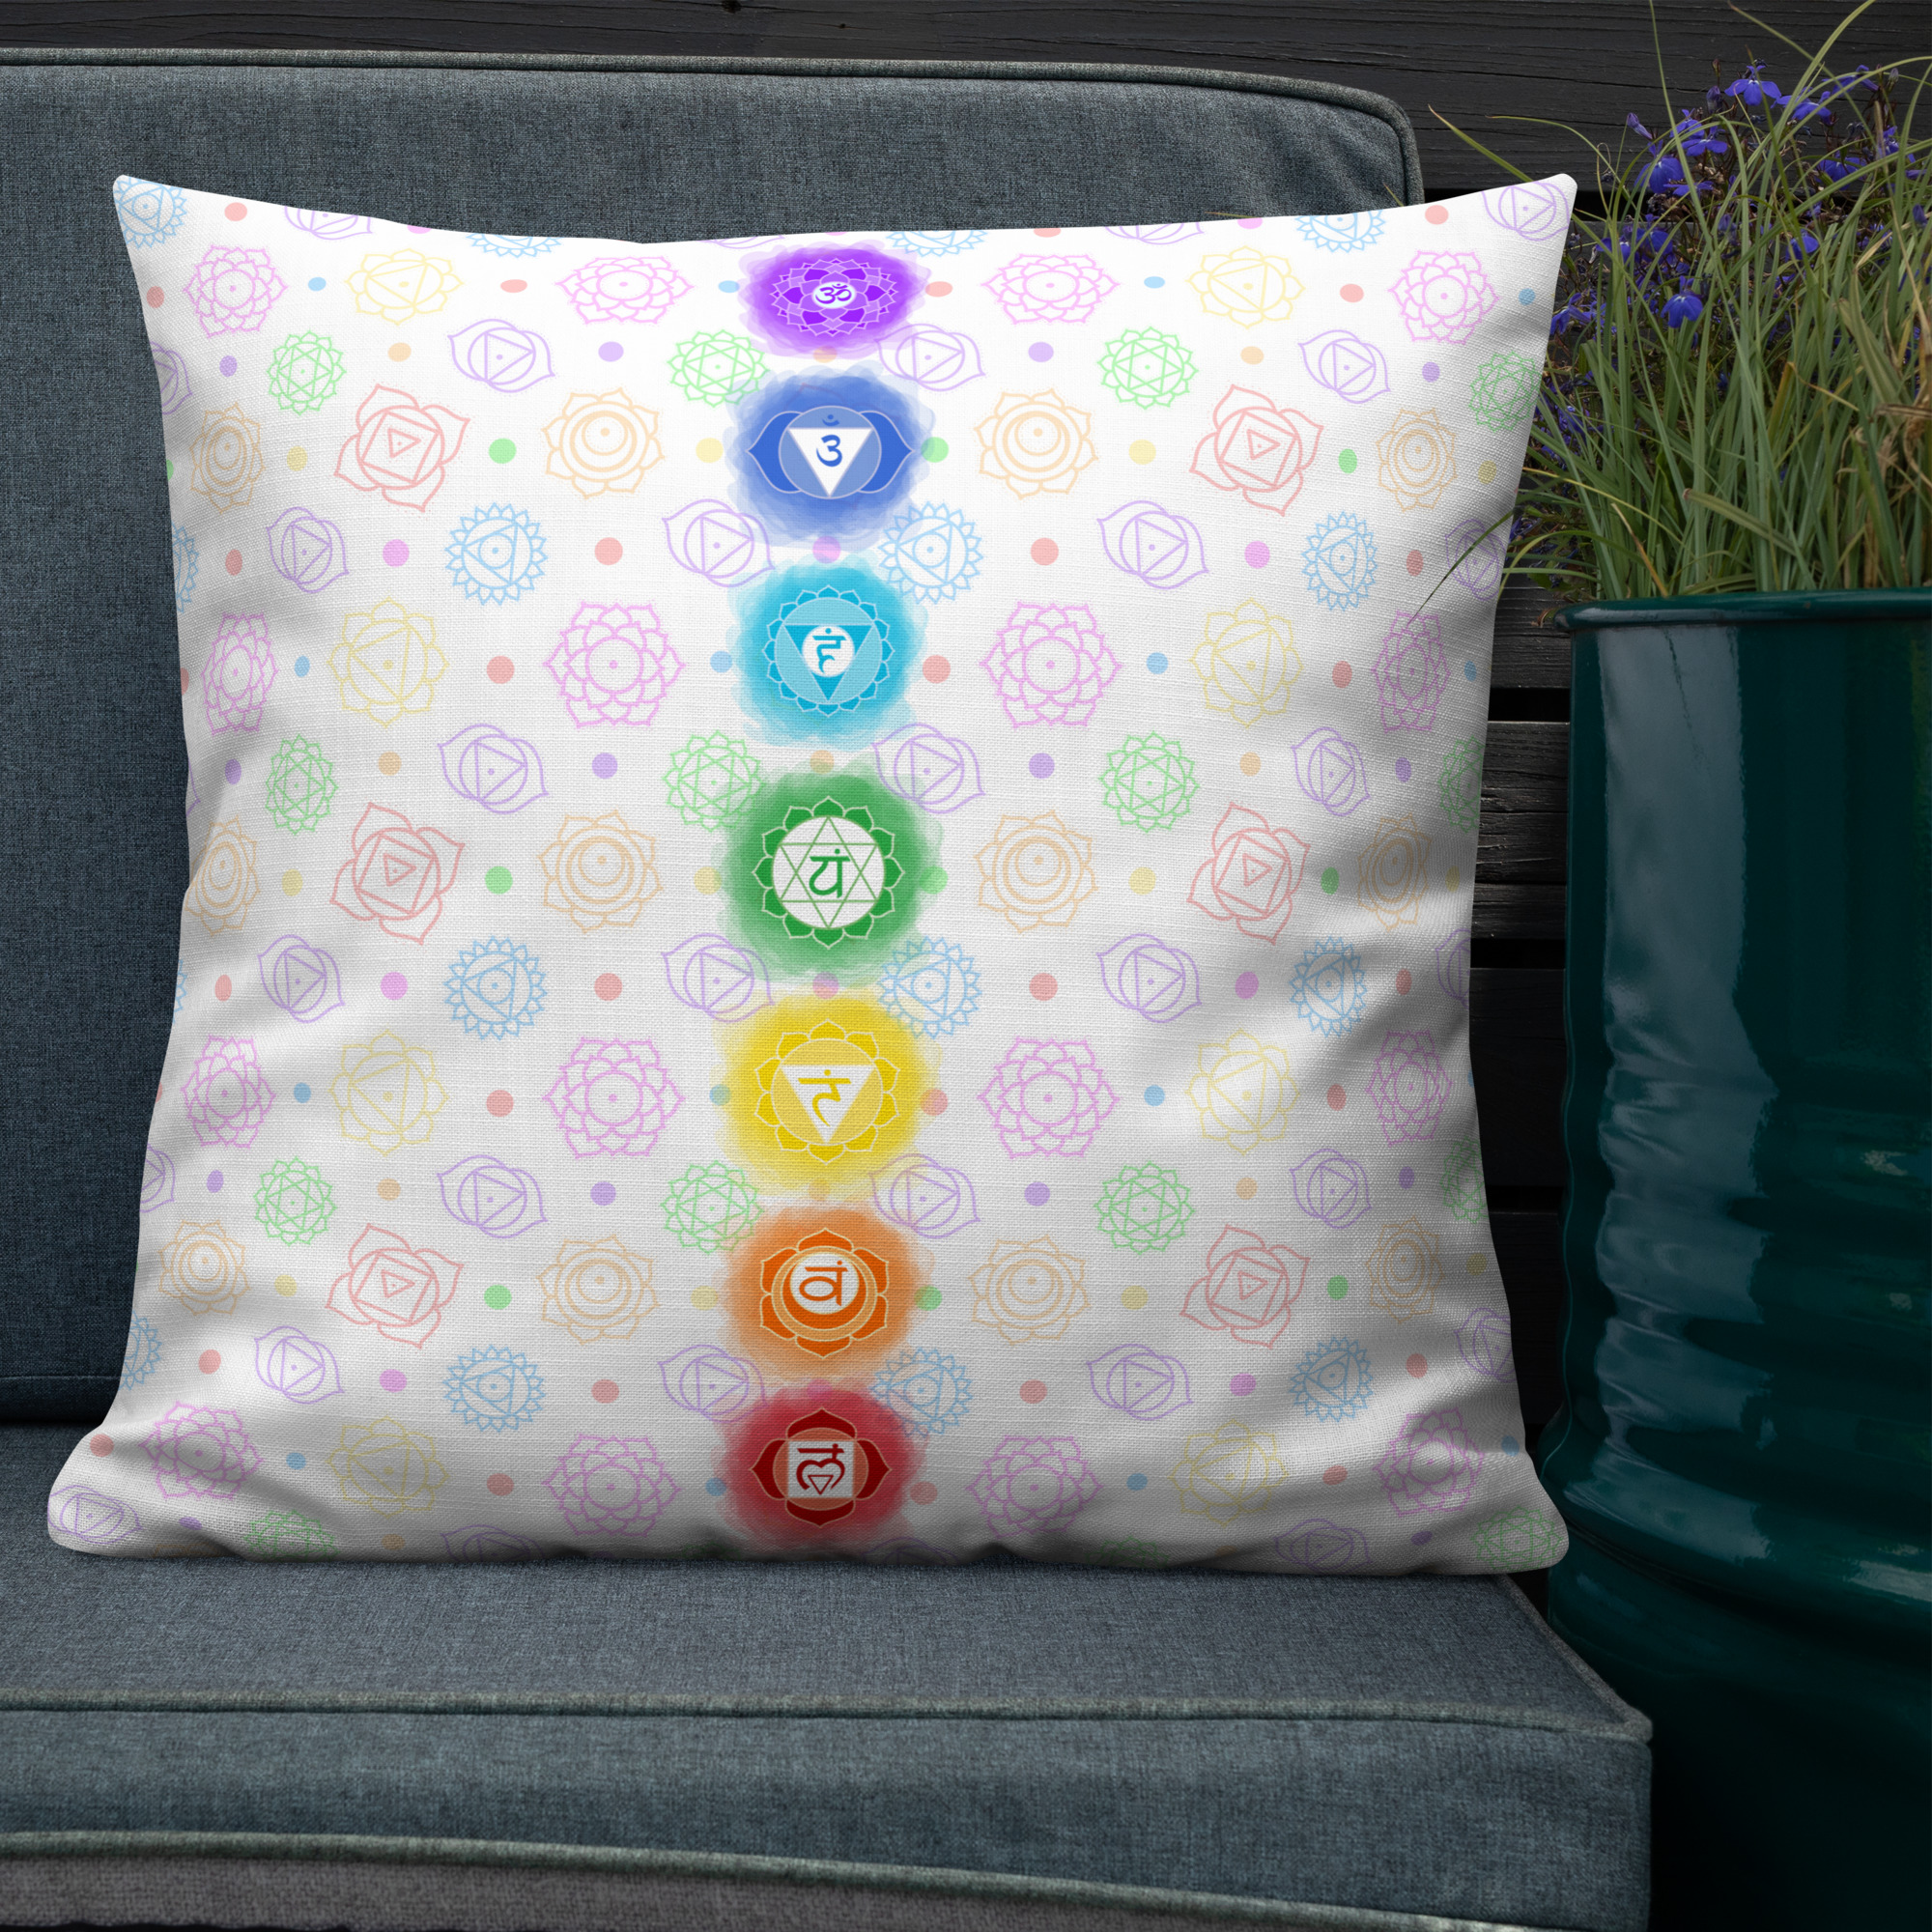 Creative Muse' Sacral Chakra Pillow - Empowered with Alana #empoweredAF  #coaching #evolve